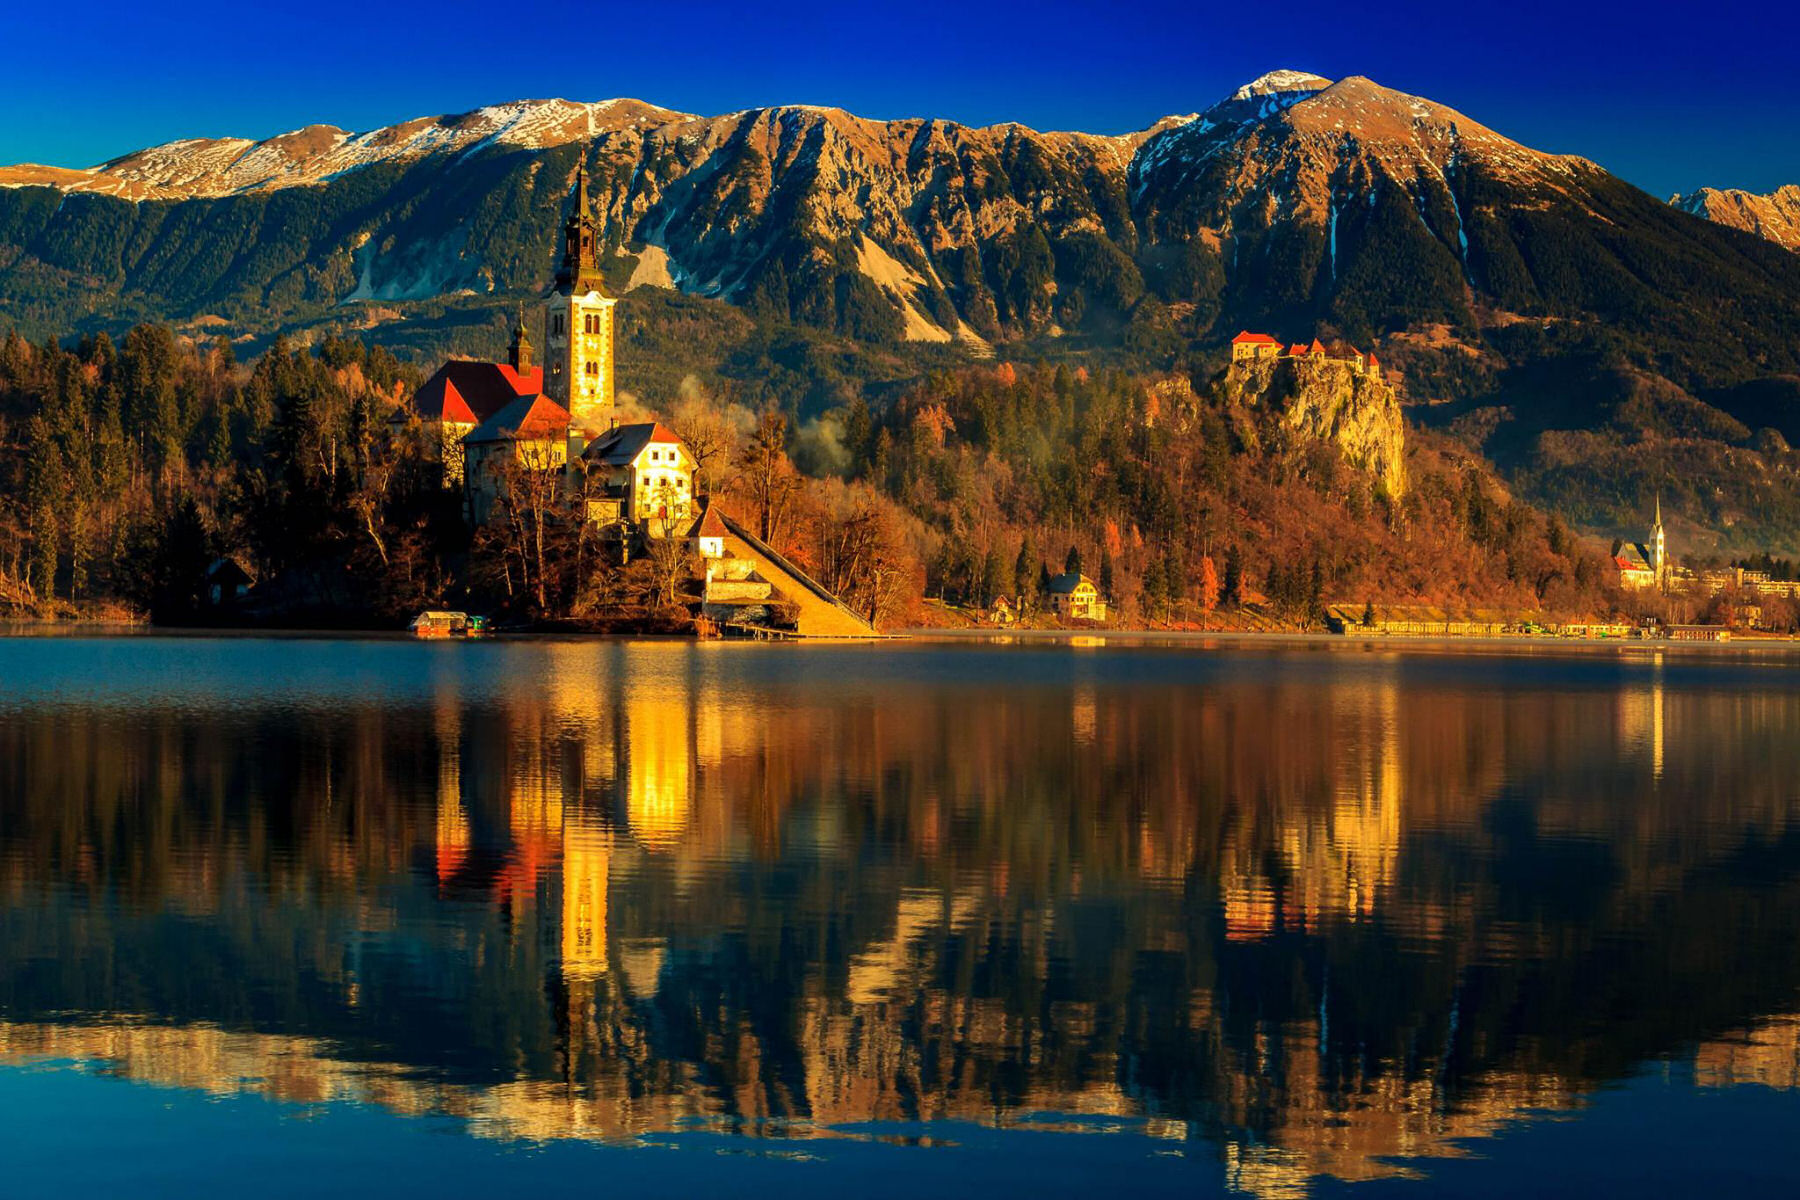 All You Need To Know To Visit The Bled Castle, Slovenia